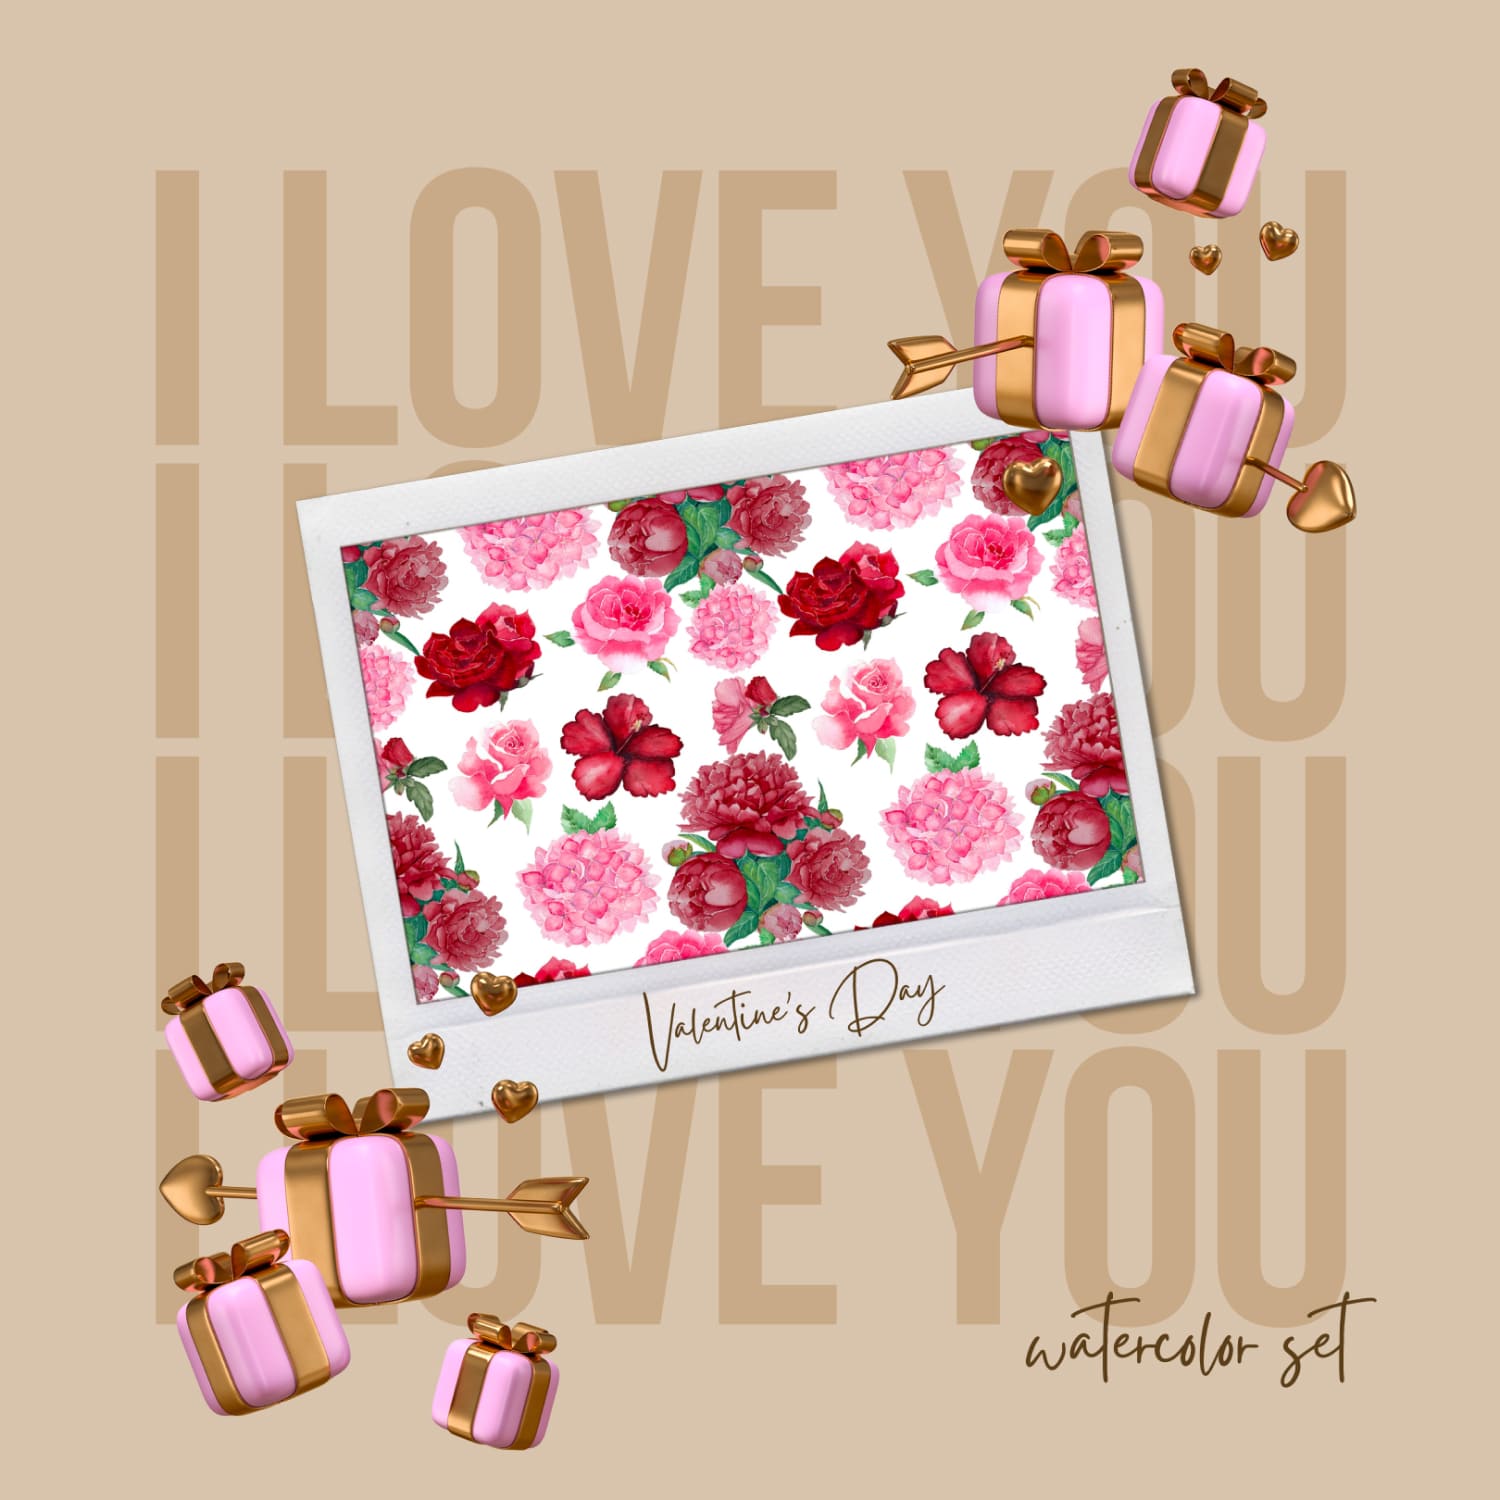 Valentine's Day Watercolor Set - main image preview.